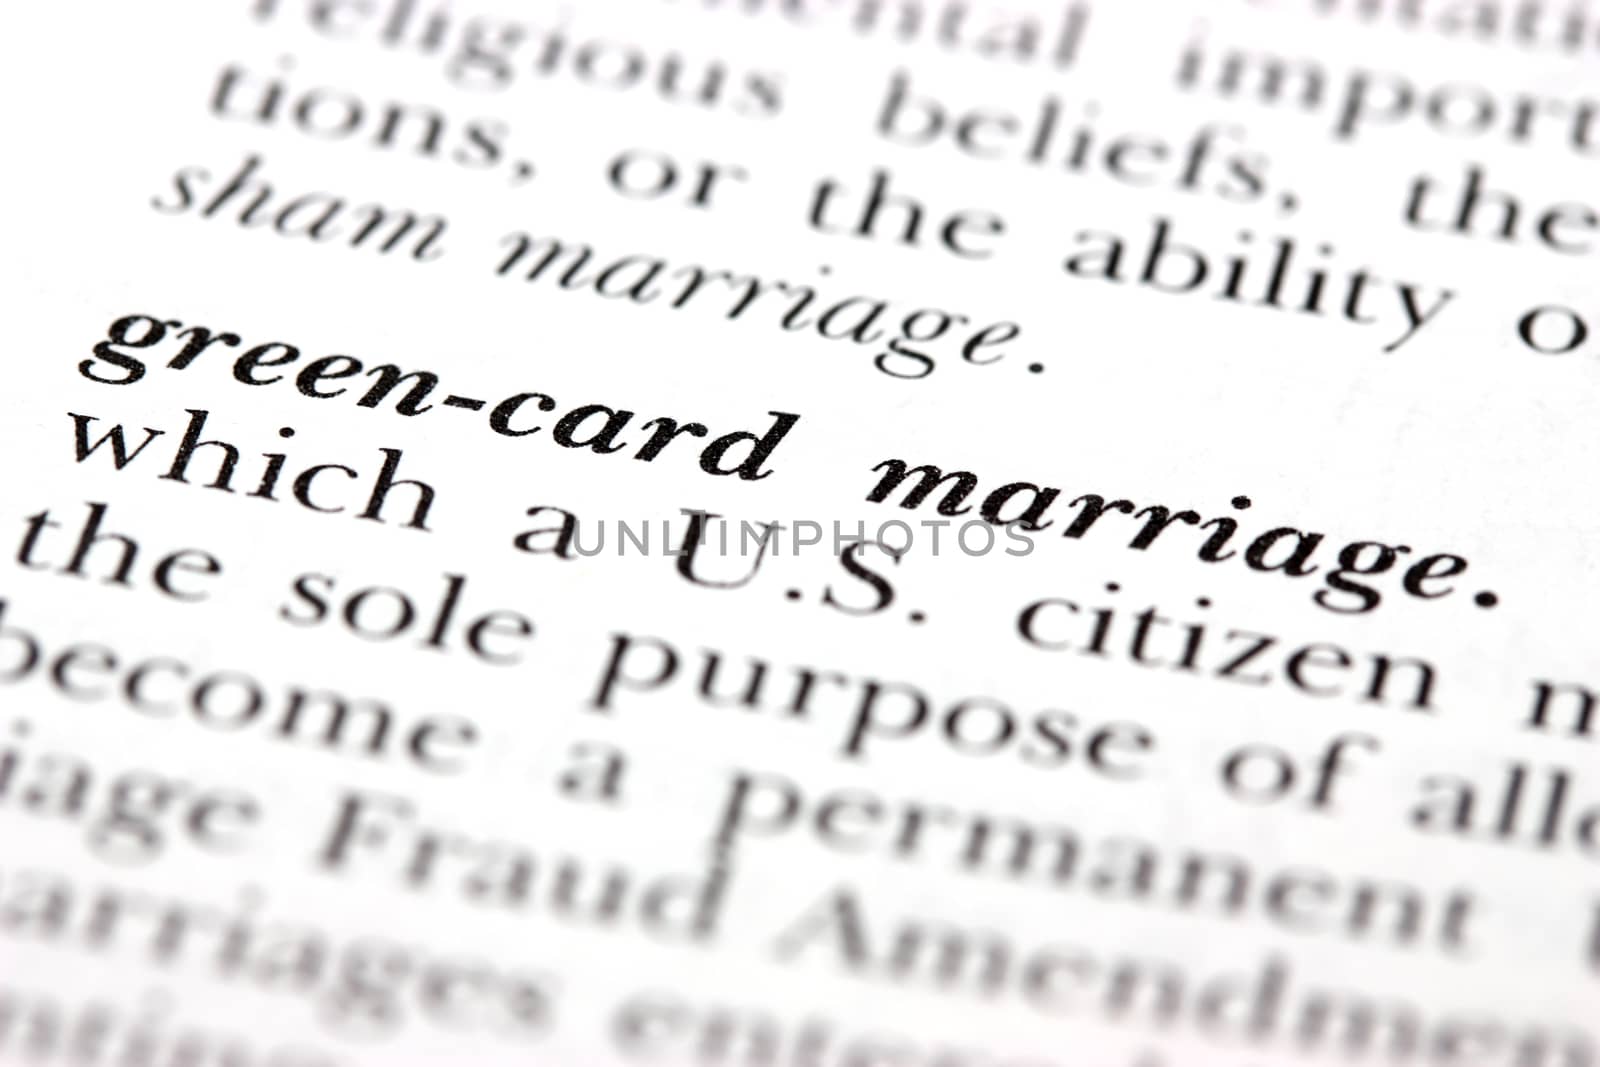 Green-card marriage by ziss